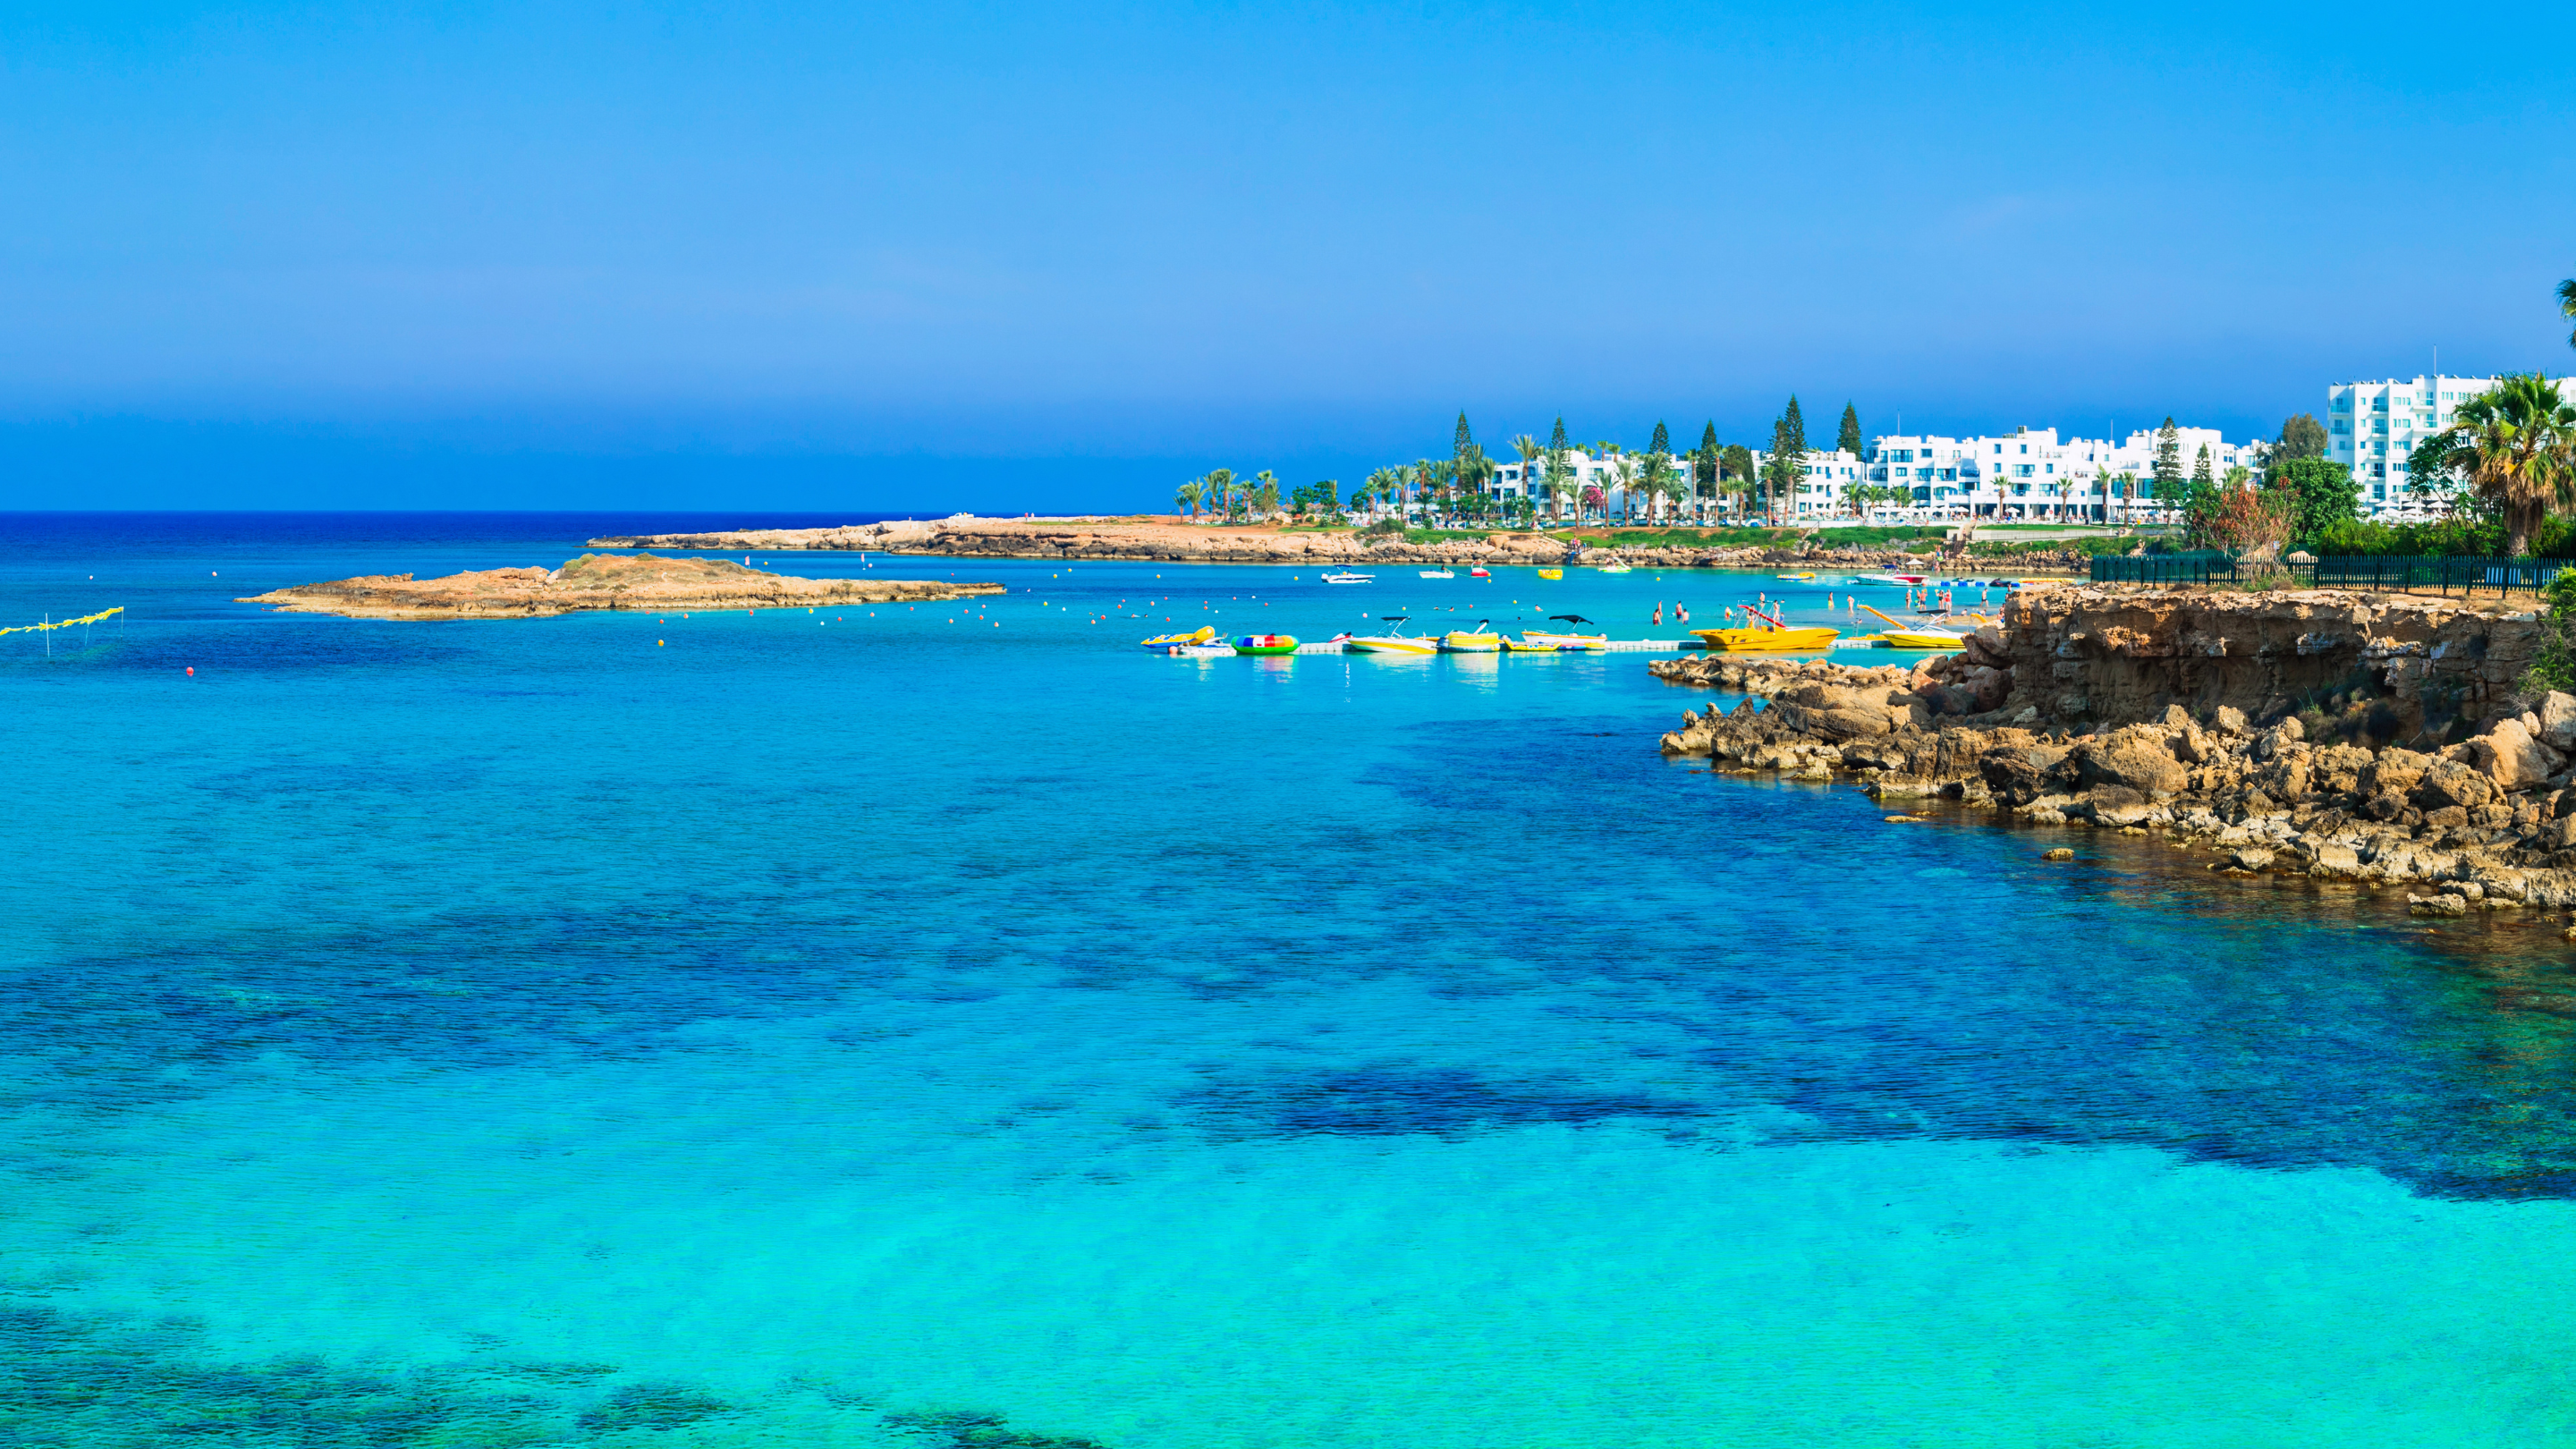 Indulge in inspiring coves of crystal clears waters during your Protaras Cyprus holidays